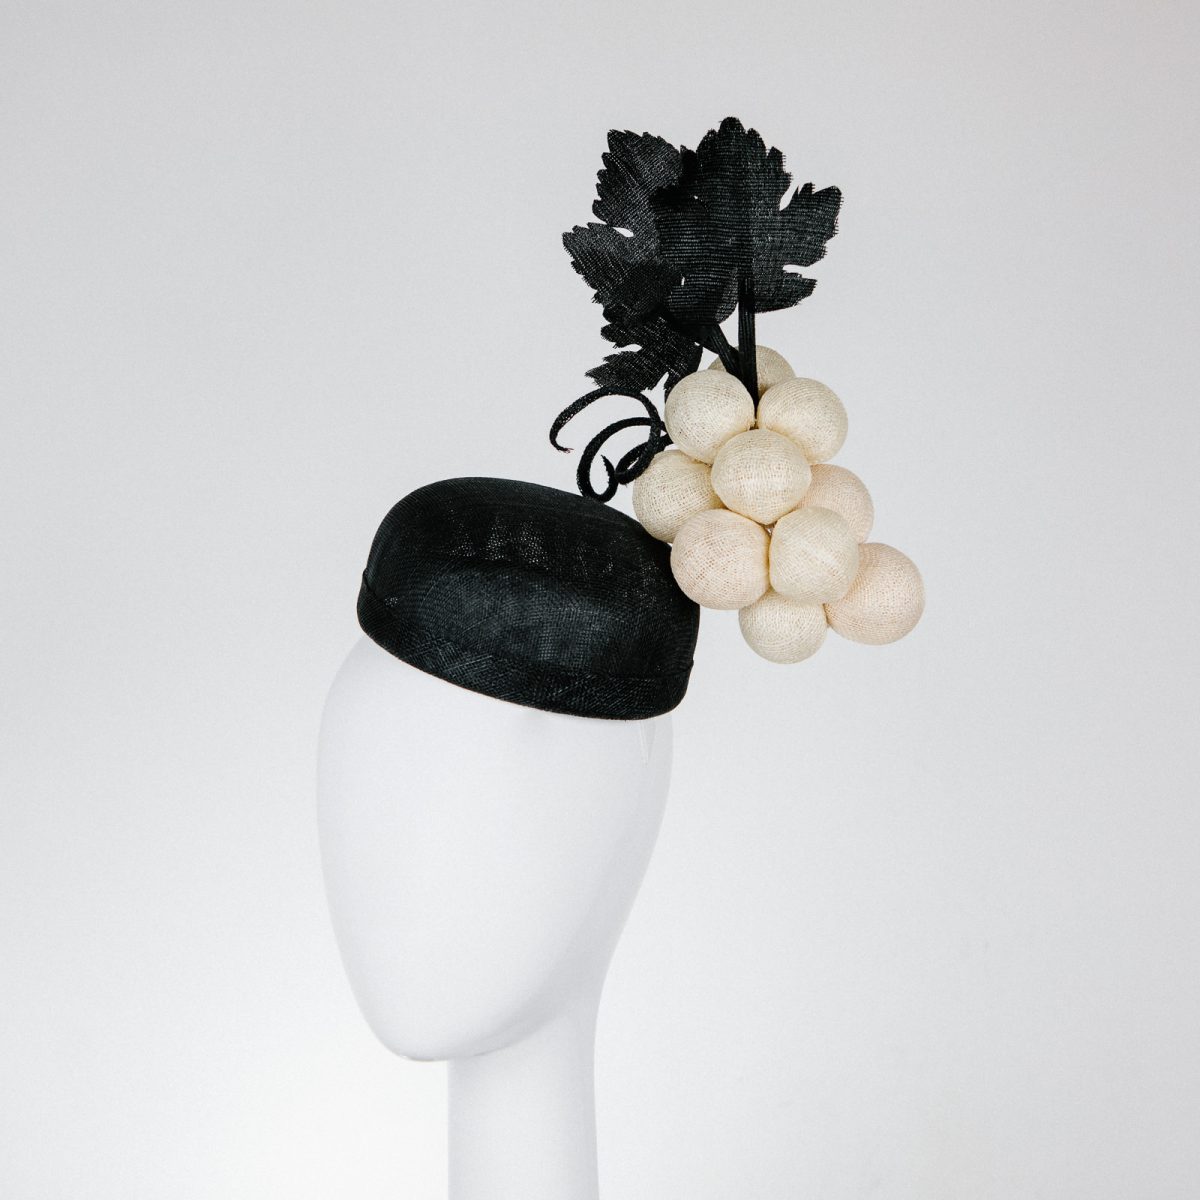 creative headpieces Cream and black for derby day